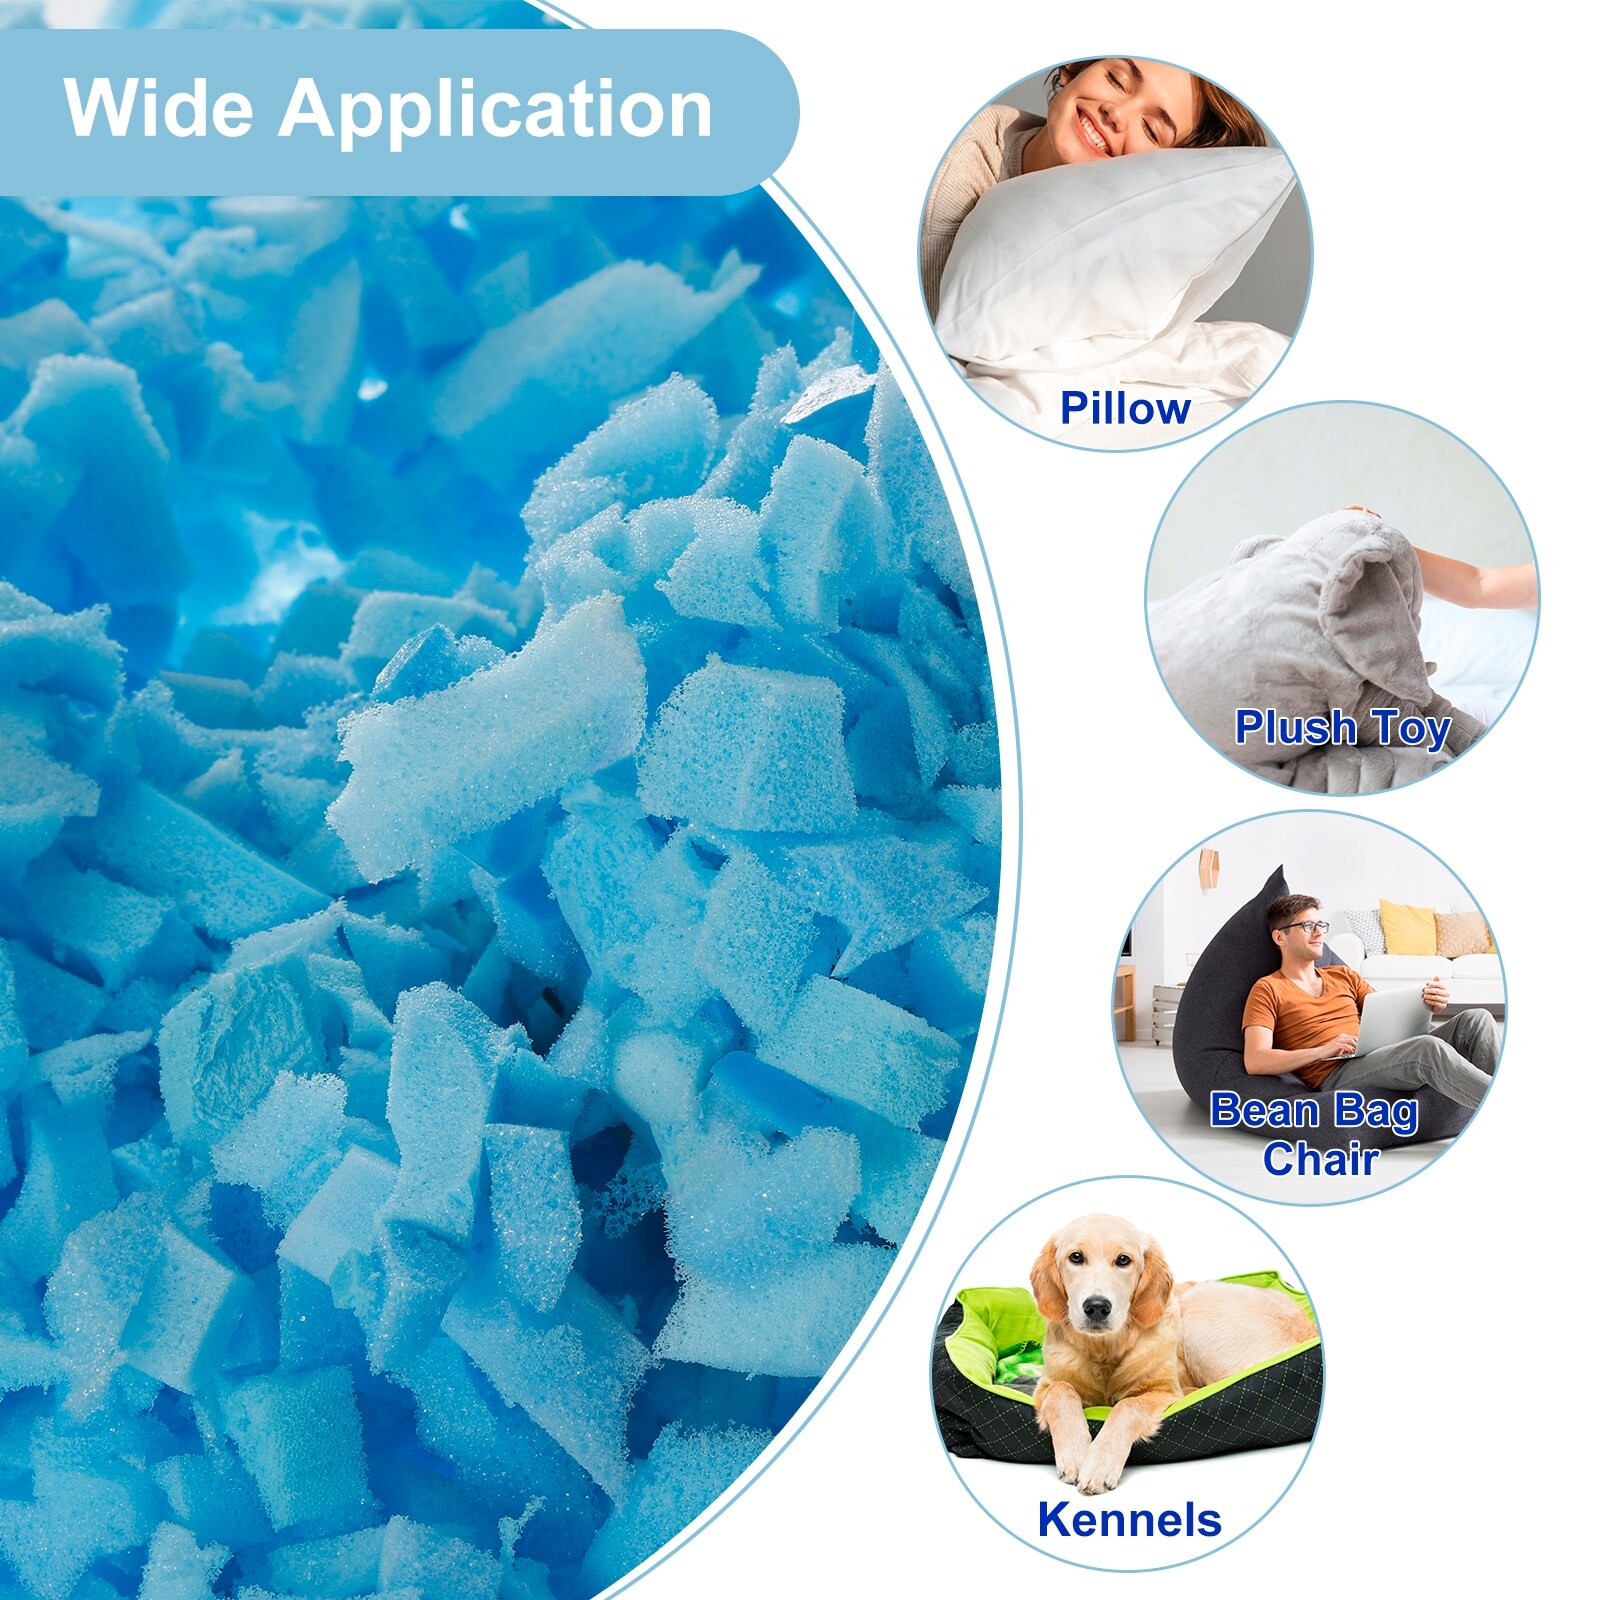 Make Your Bean Bag as Good as New with Blue Shredded Memory Foam Refill -  Ashley